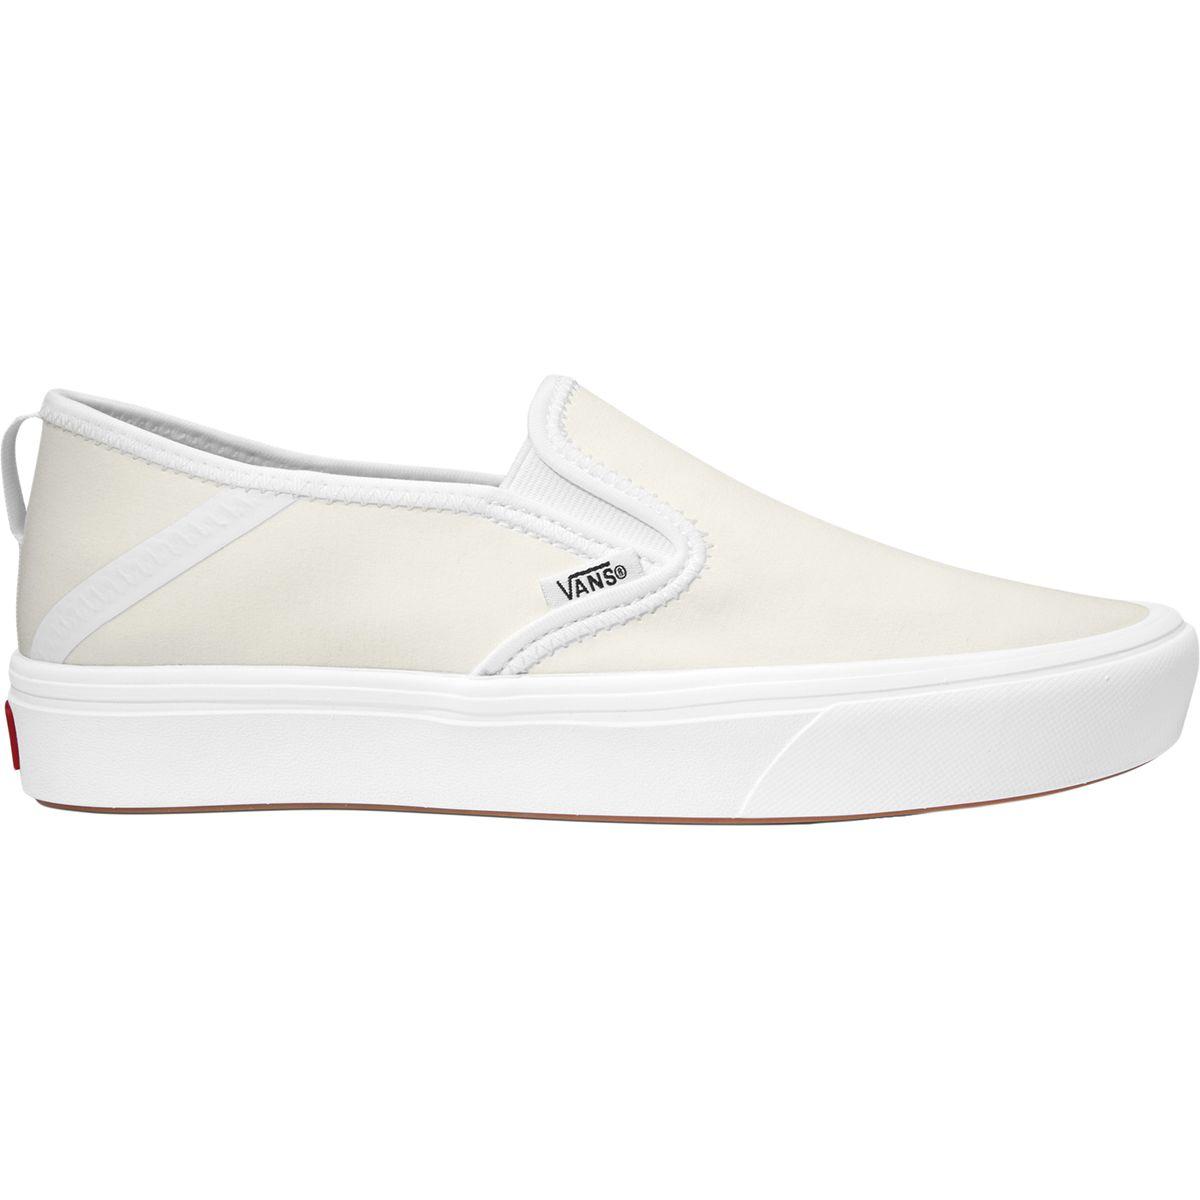 Vans Canvas Comfycush Slip-on Sf Shoe in White - Lyst